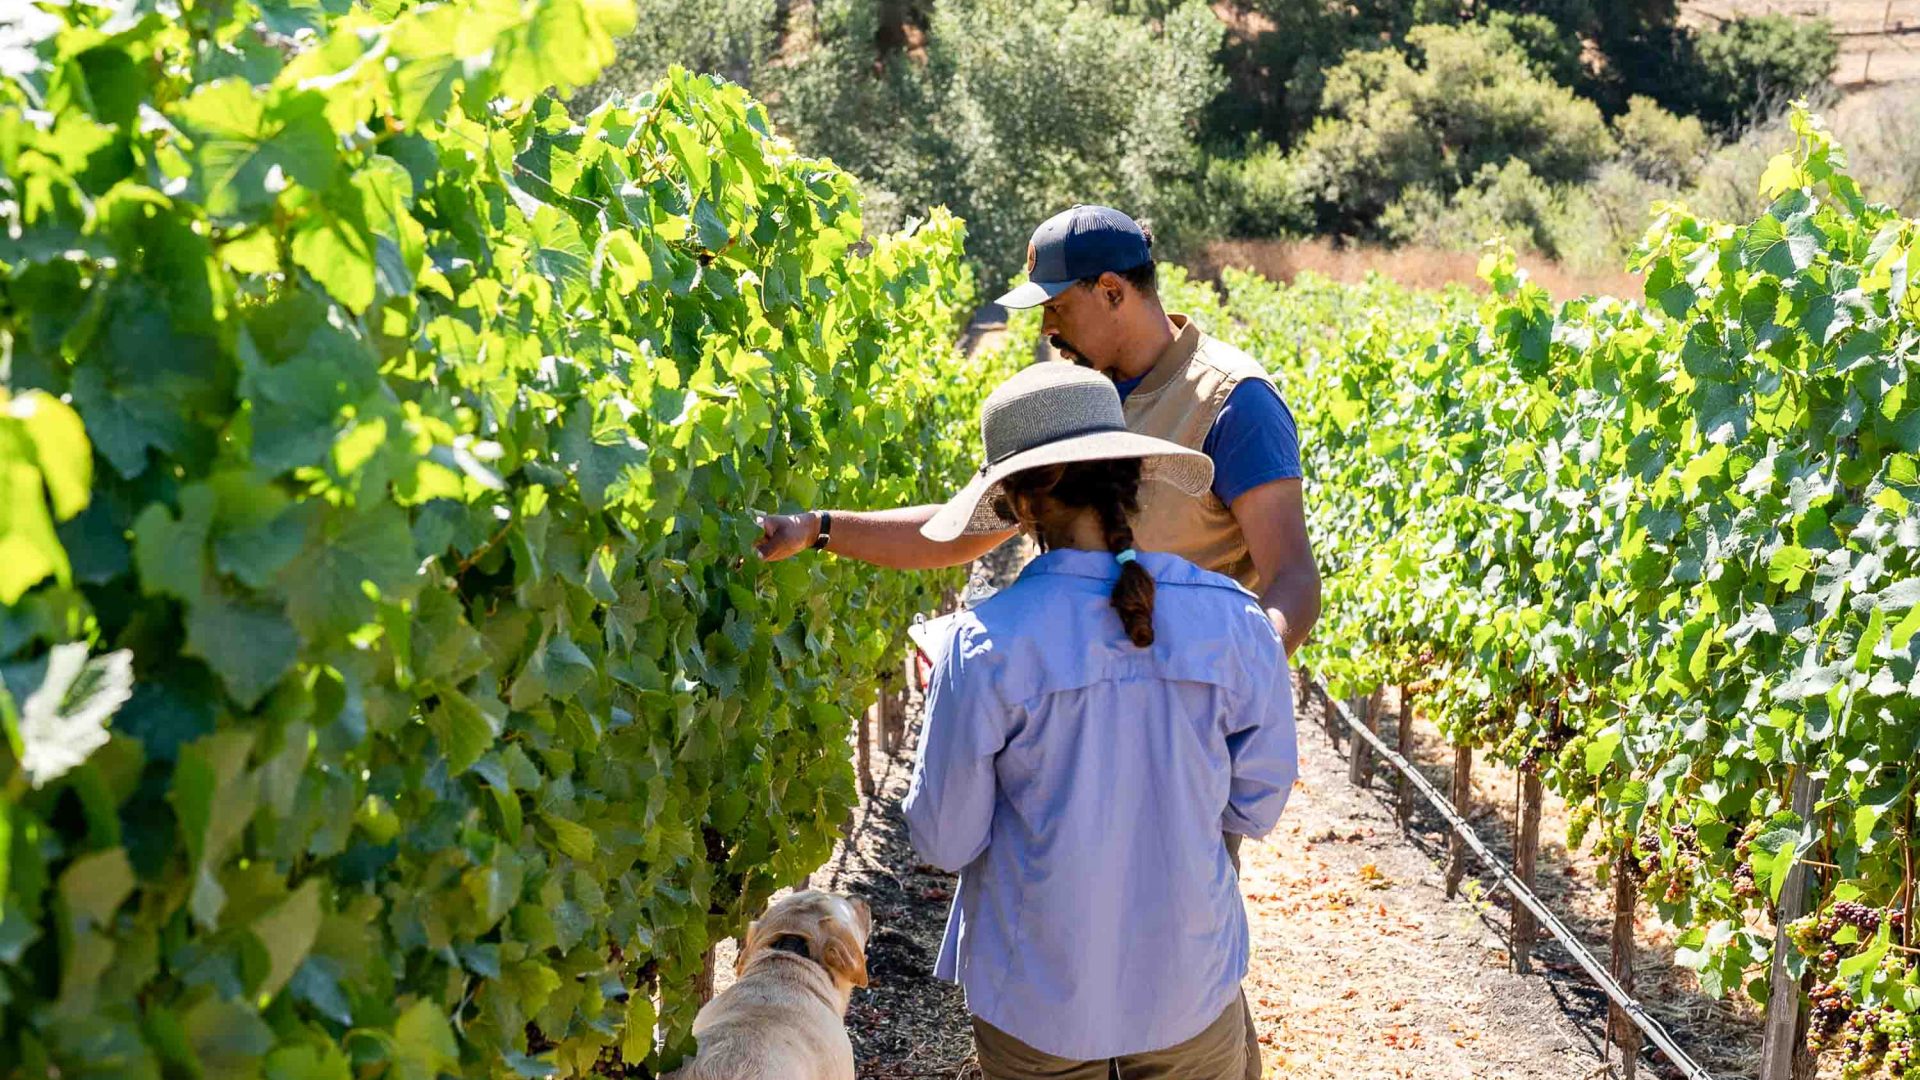 A man and a woman look at vines of grapes.